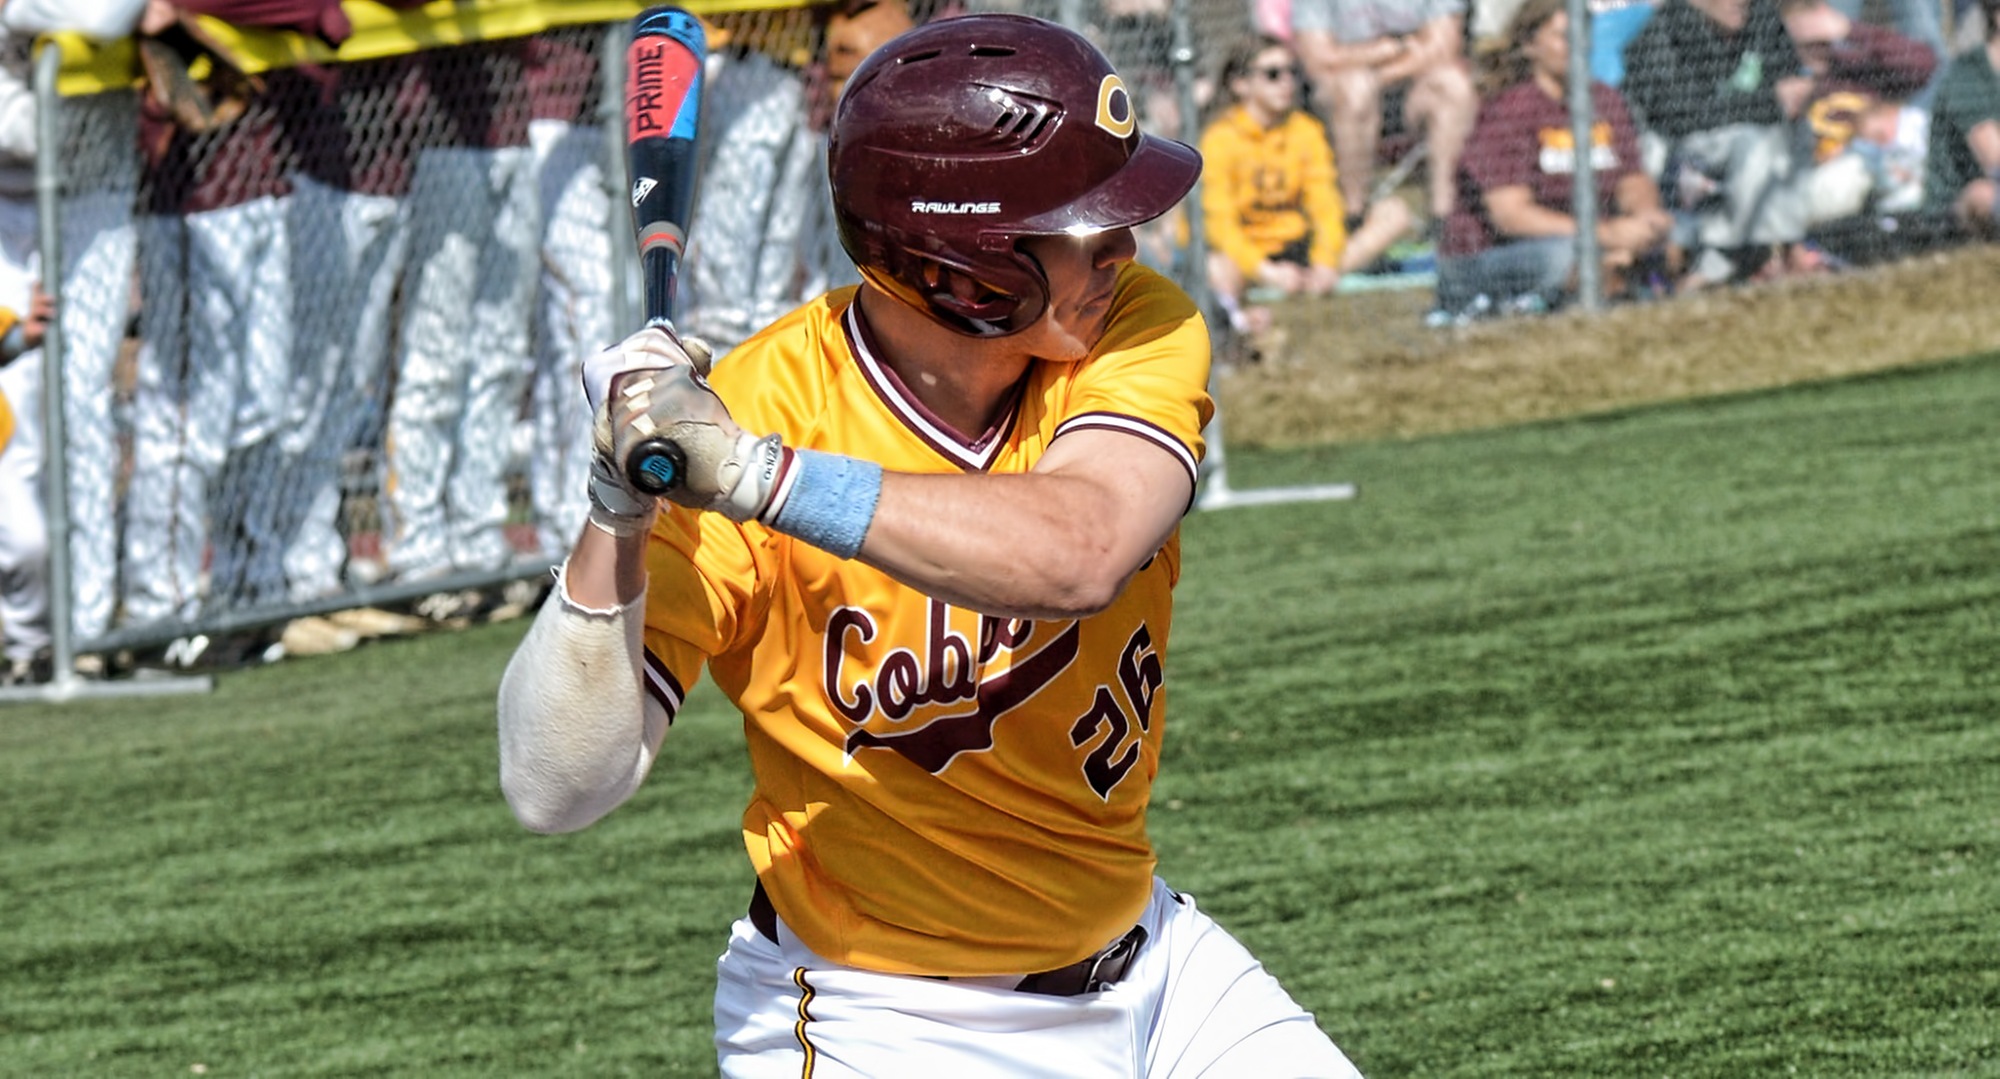 Senior Turner Storm went 5-for-7 with three RBI in the Cobbers' doubleheader at St. John's.